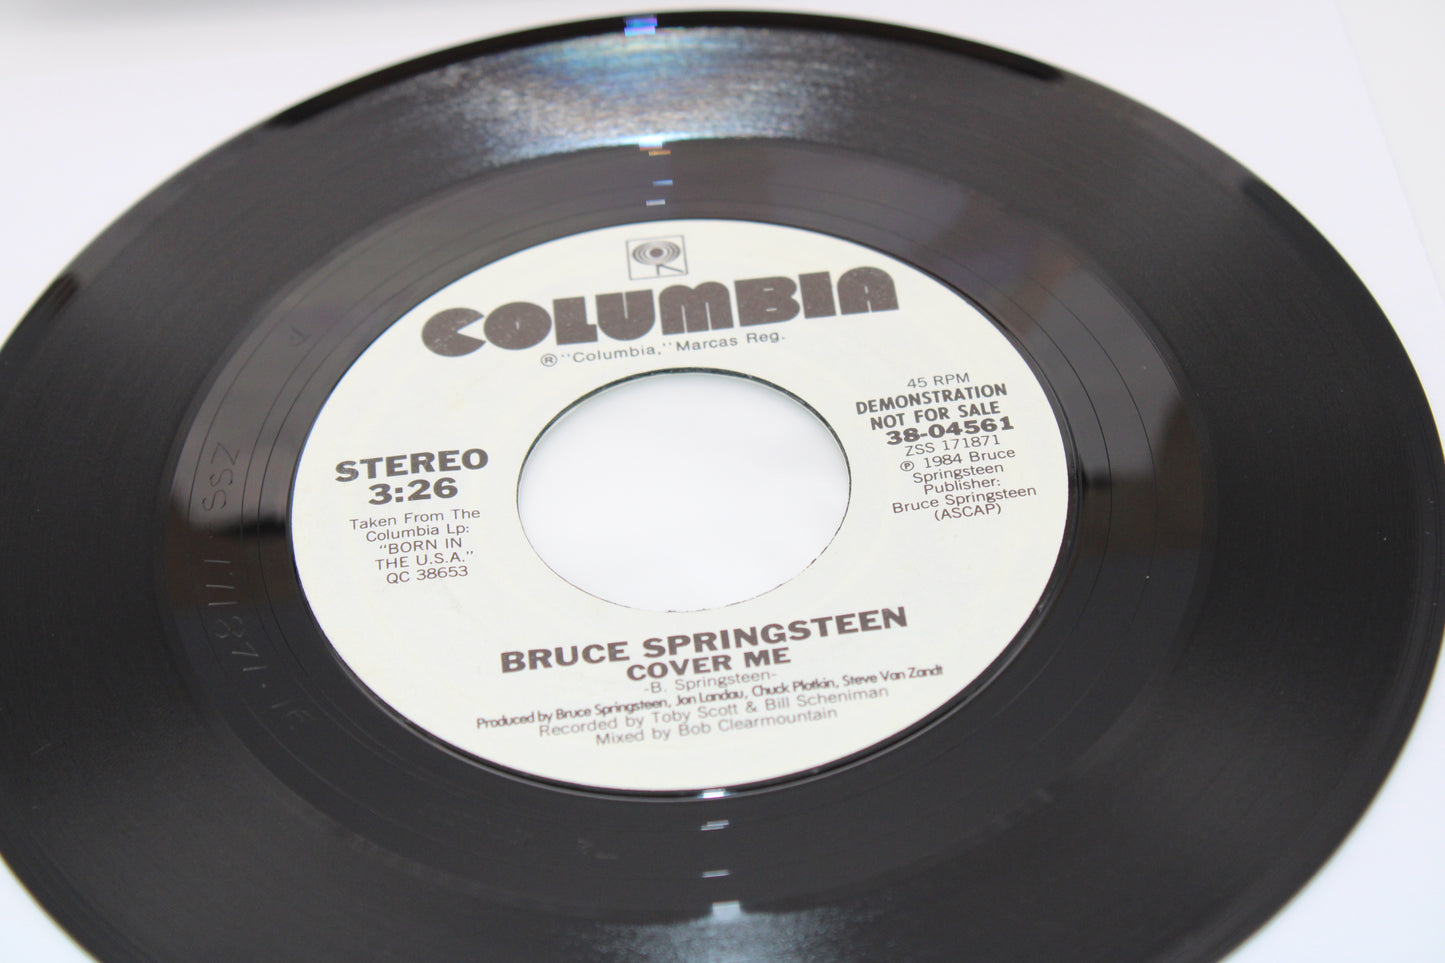 Bruce Springsteen 45 record - Cover Me "Demonstration/Not For Sale" 1984 original